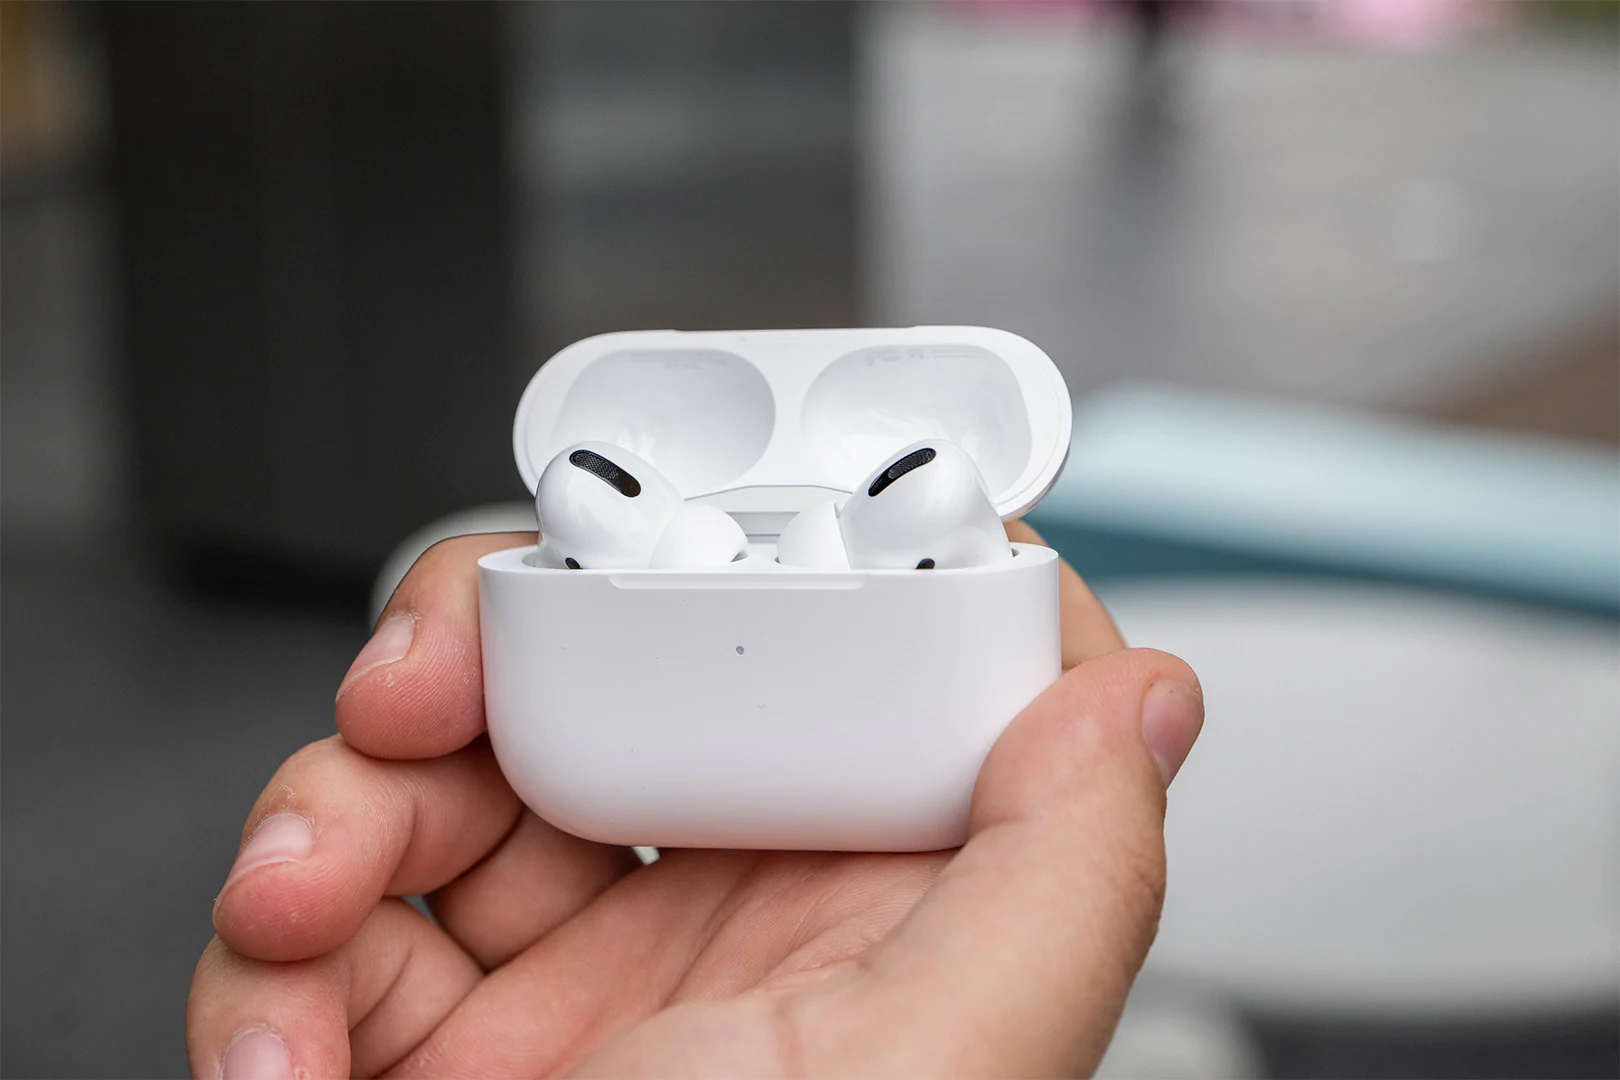 Apple’s new spatial audio feature turns AirPods Pro into a home theater